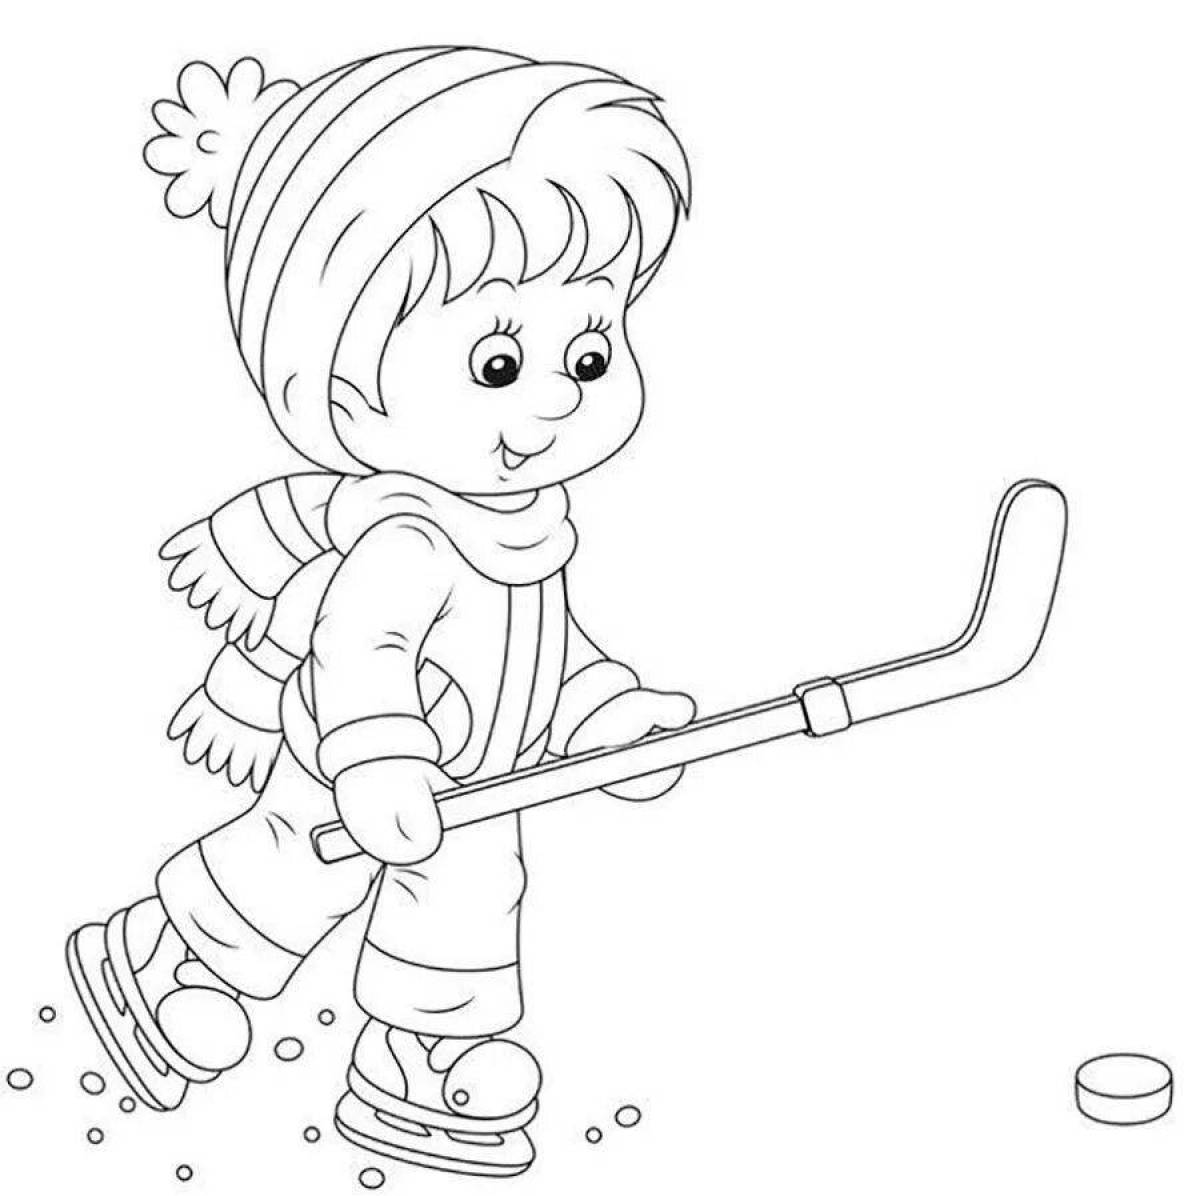 Adventure winter sports coloring page